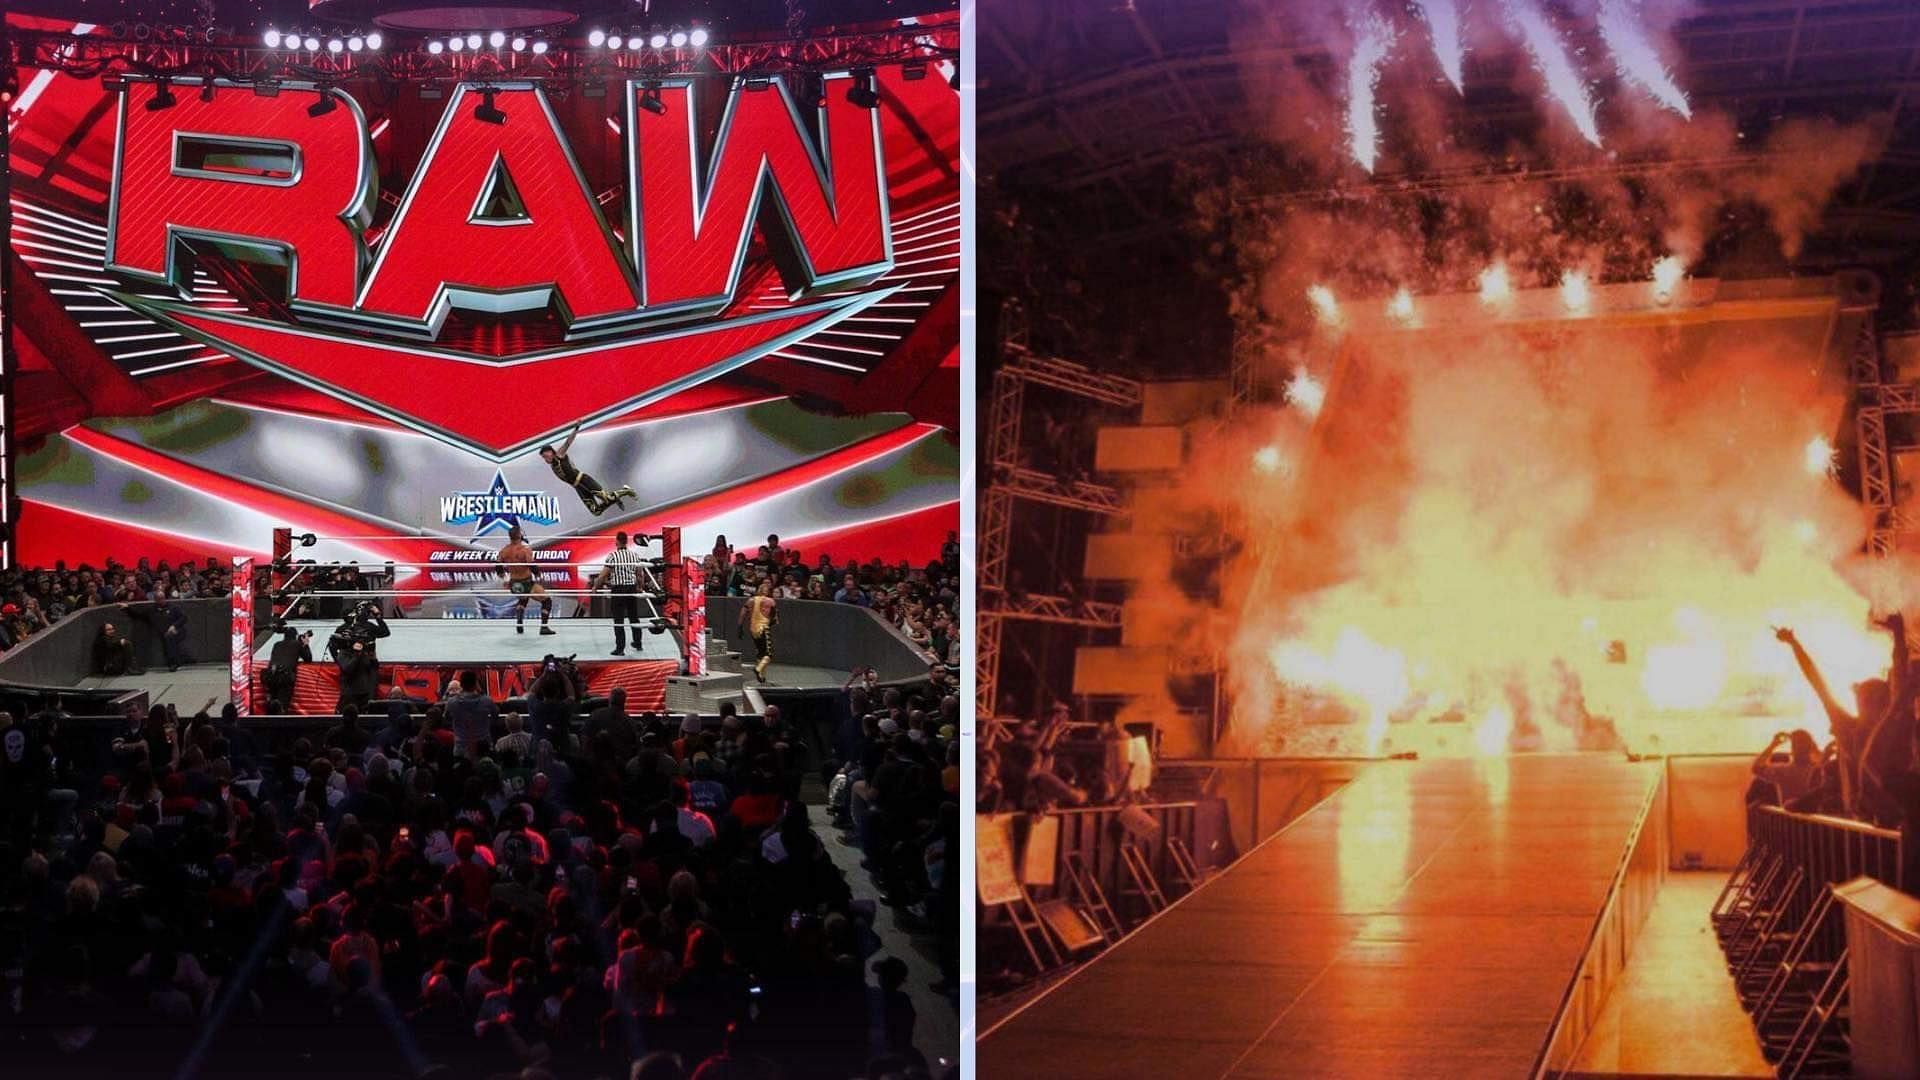 WWE RAW this week will be live from the Bell Centre in Montreal, Canada